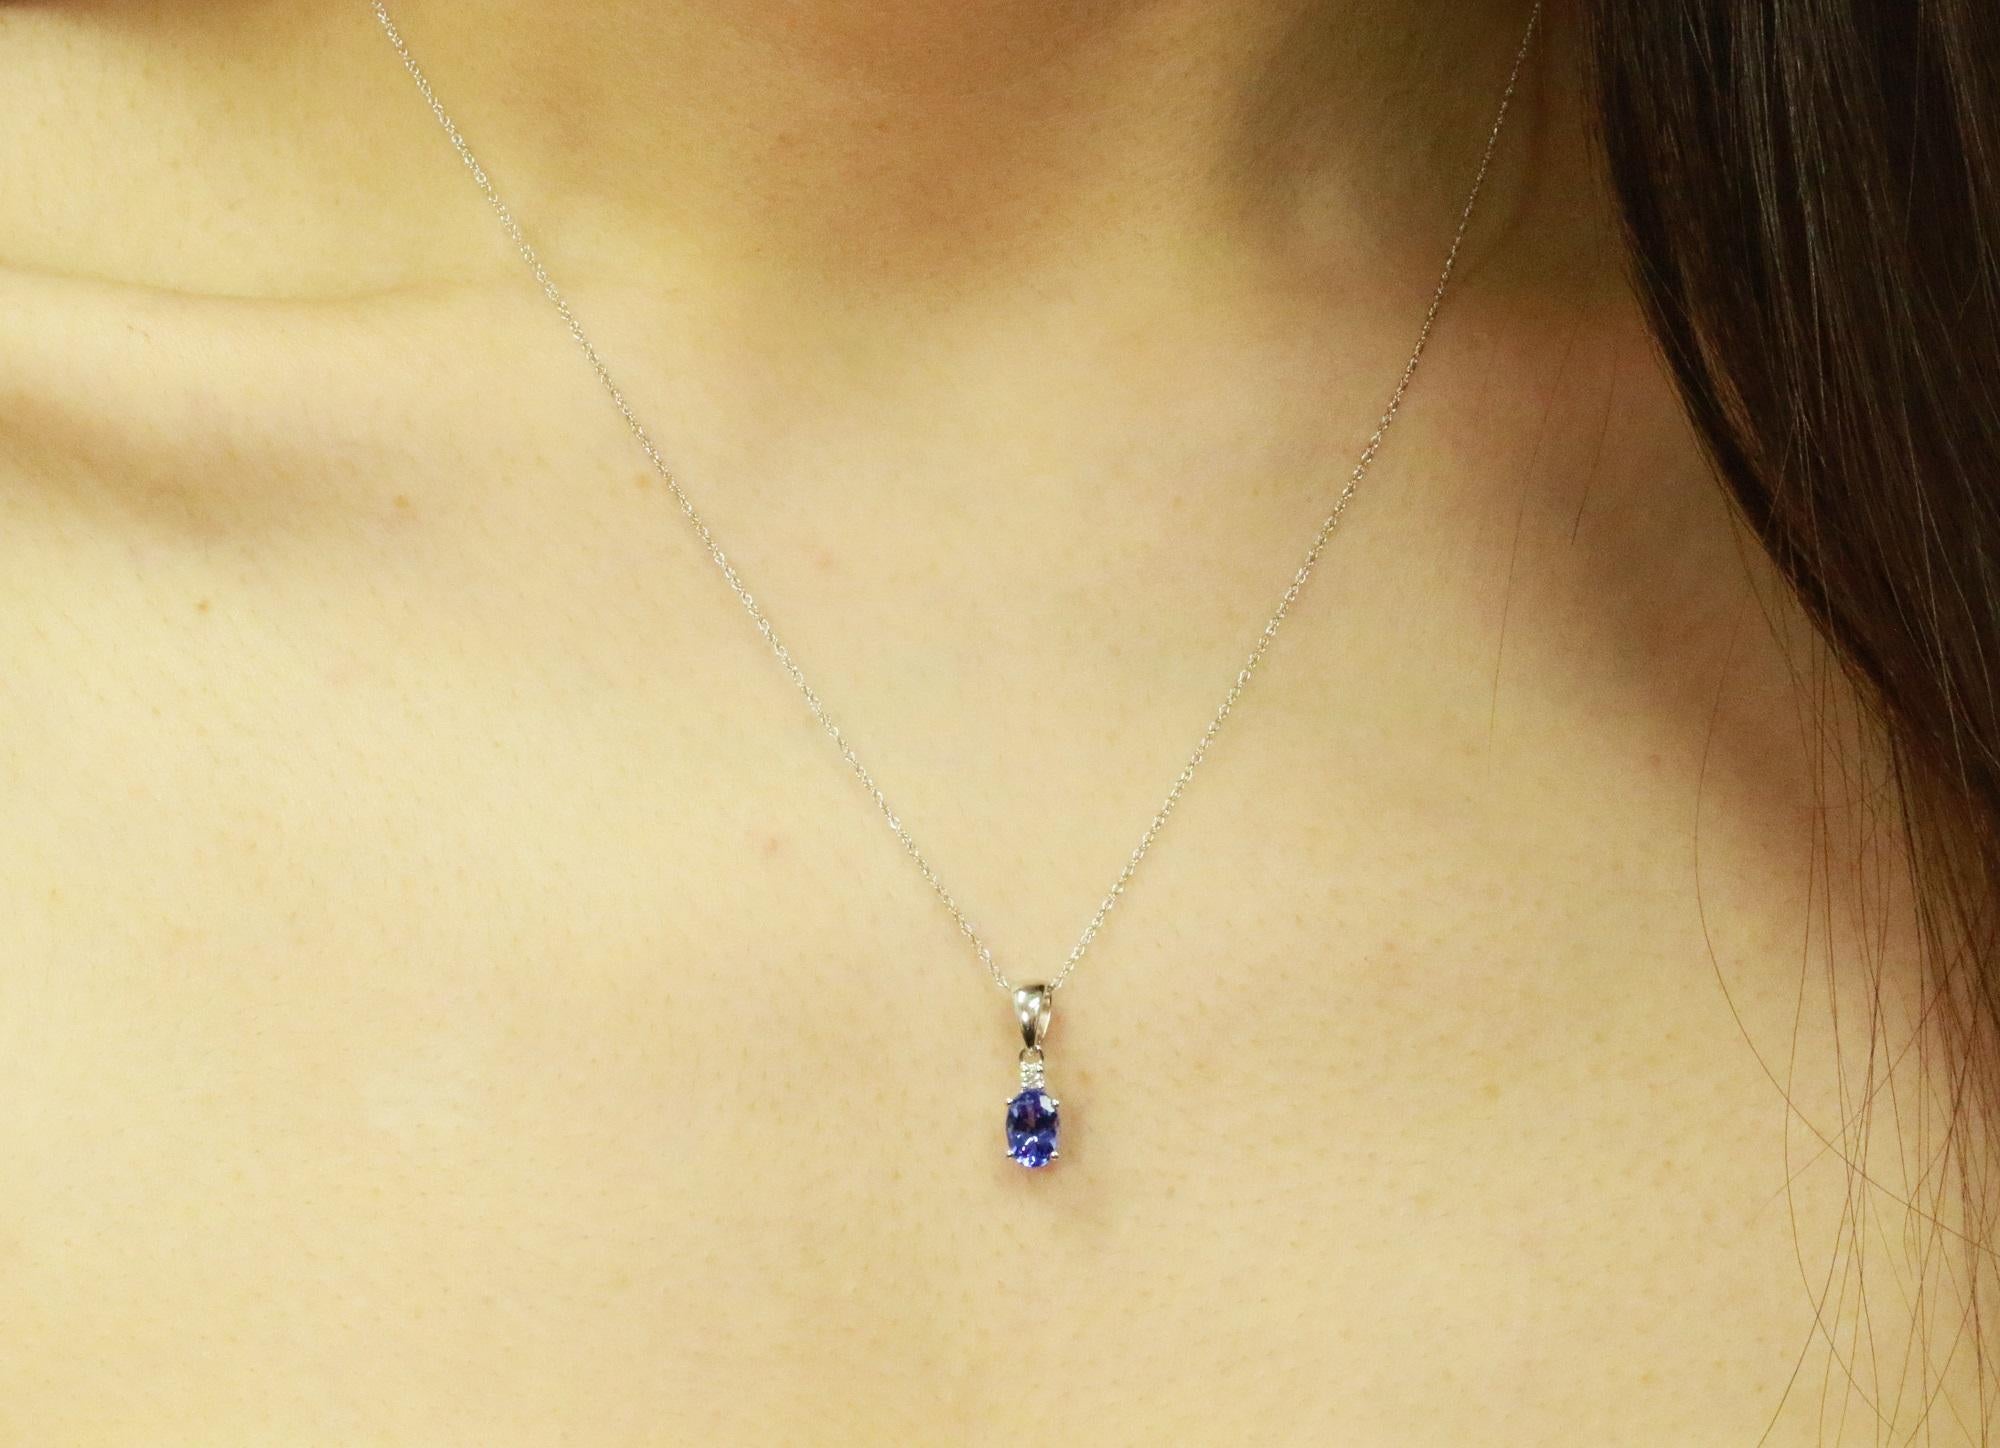 Decorate yourself in elegance with this Pendant is crafted from 10-karat White Gold by Gin & Grace Pendant. This Pendant is made up of 5X7 Oval-Cut Prong setting Genuine Tanzanite (1 Pcs) 0.78 Carat and Round-Cut Prong setting Natural White Diamond